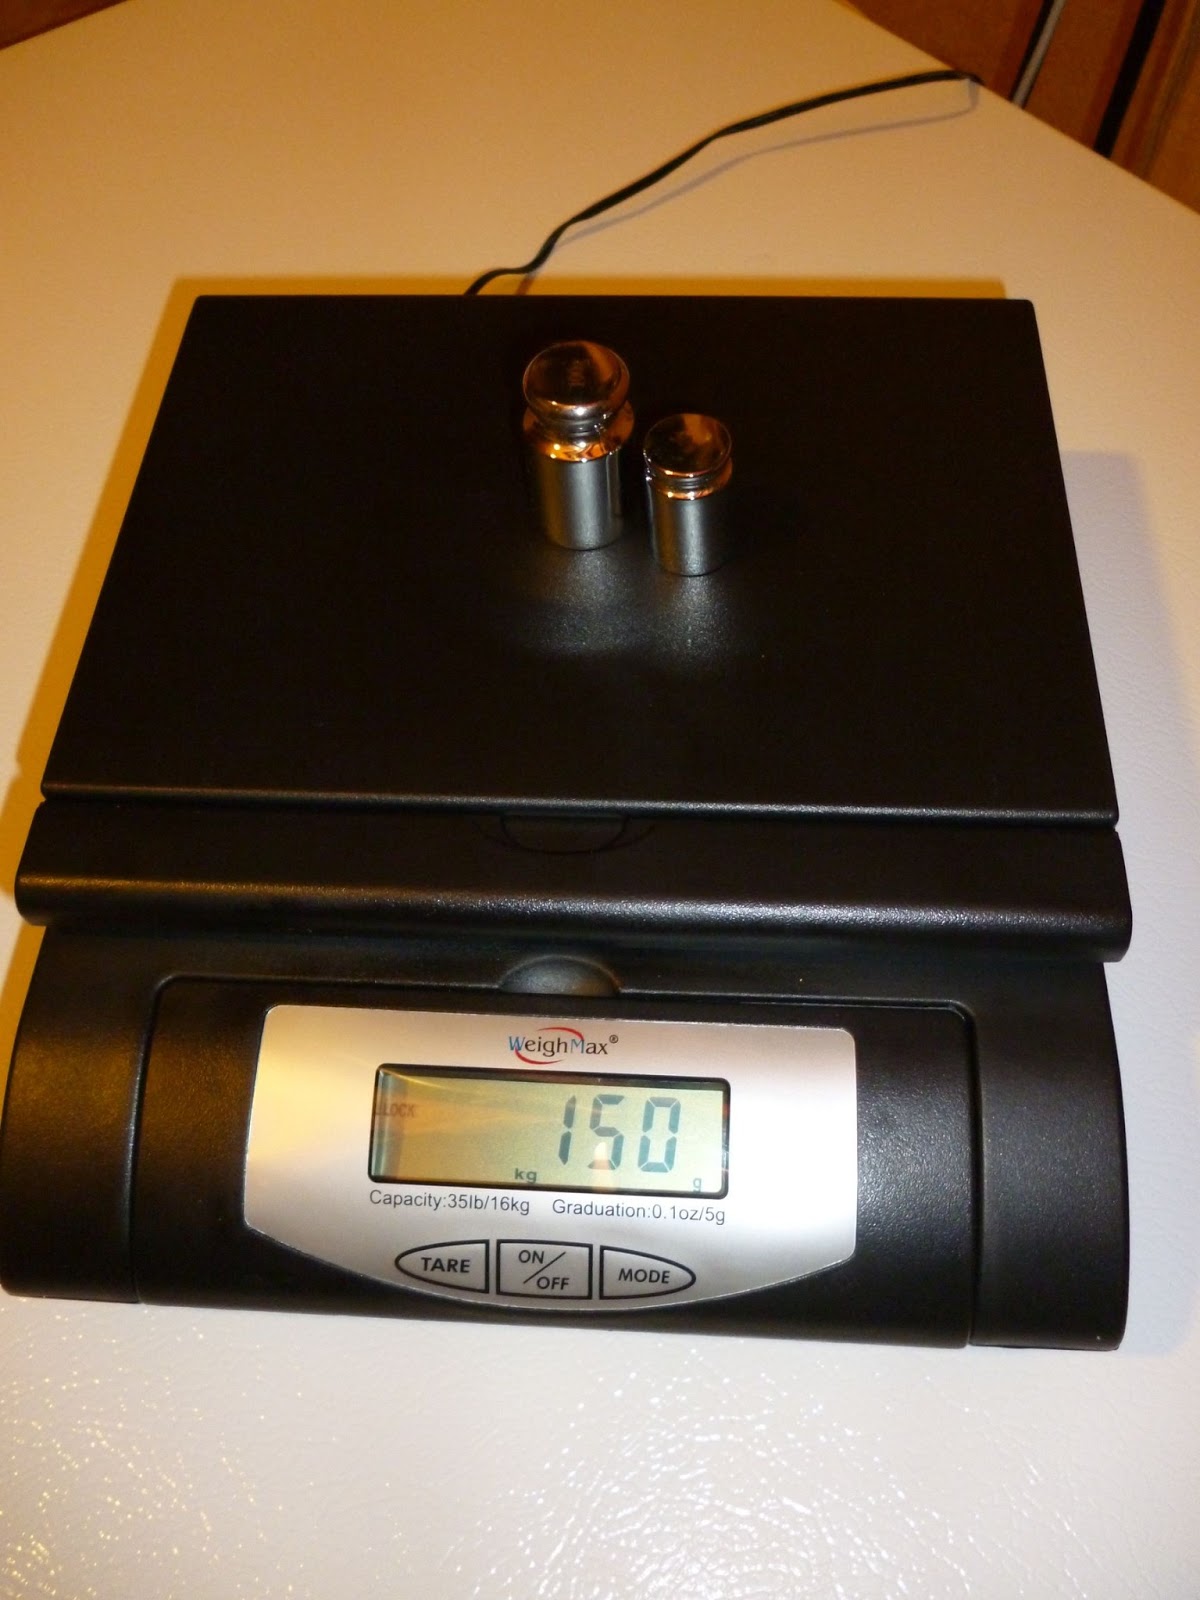 Hands On Review: Weighmax 4819 55 LB Capacity Digital Scale | Homebrew